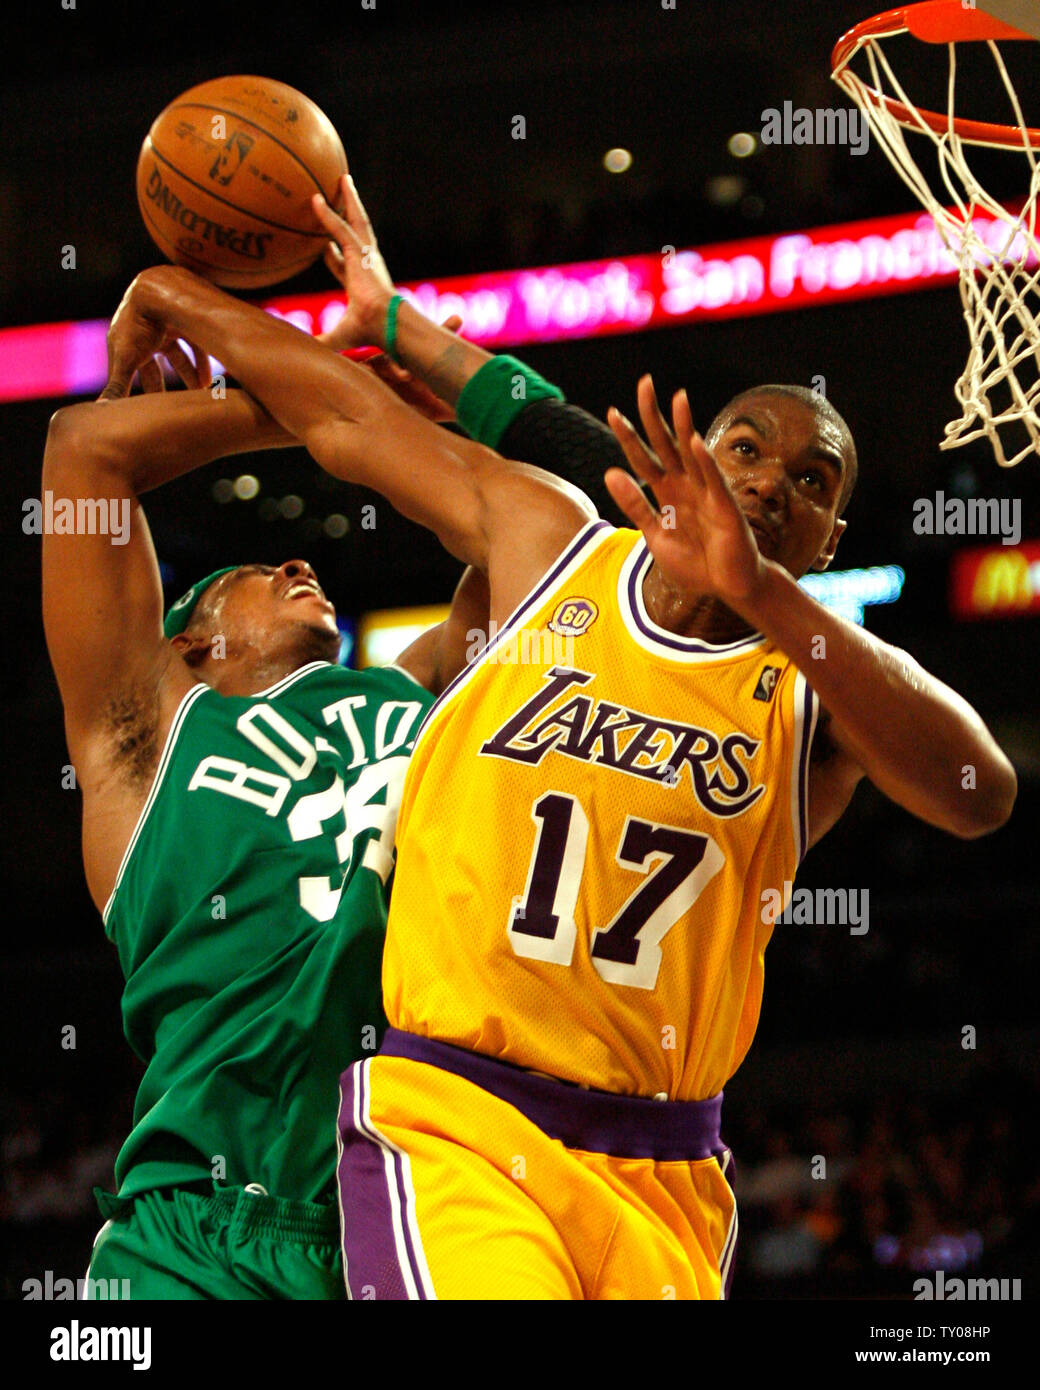 Los Angeles Lakers center Andrew Bynum (17) fouls Boston Celtics forward Paul Pierce during fourth quarter action at Staples Center in Los Angeles on December 30, 2007. The Celtics defeated the Lakers 110-91.  (UPI Photo/Jon SooHoo) Stock Photo